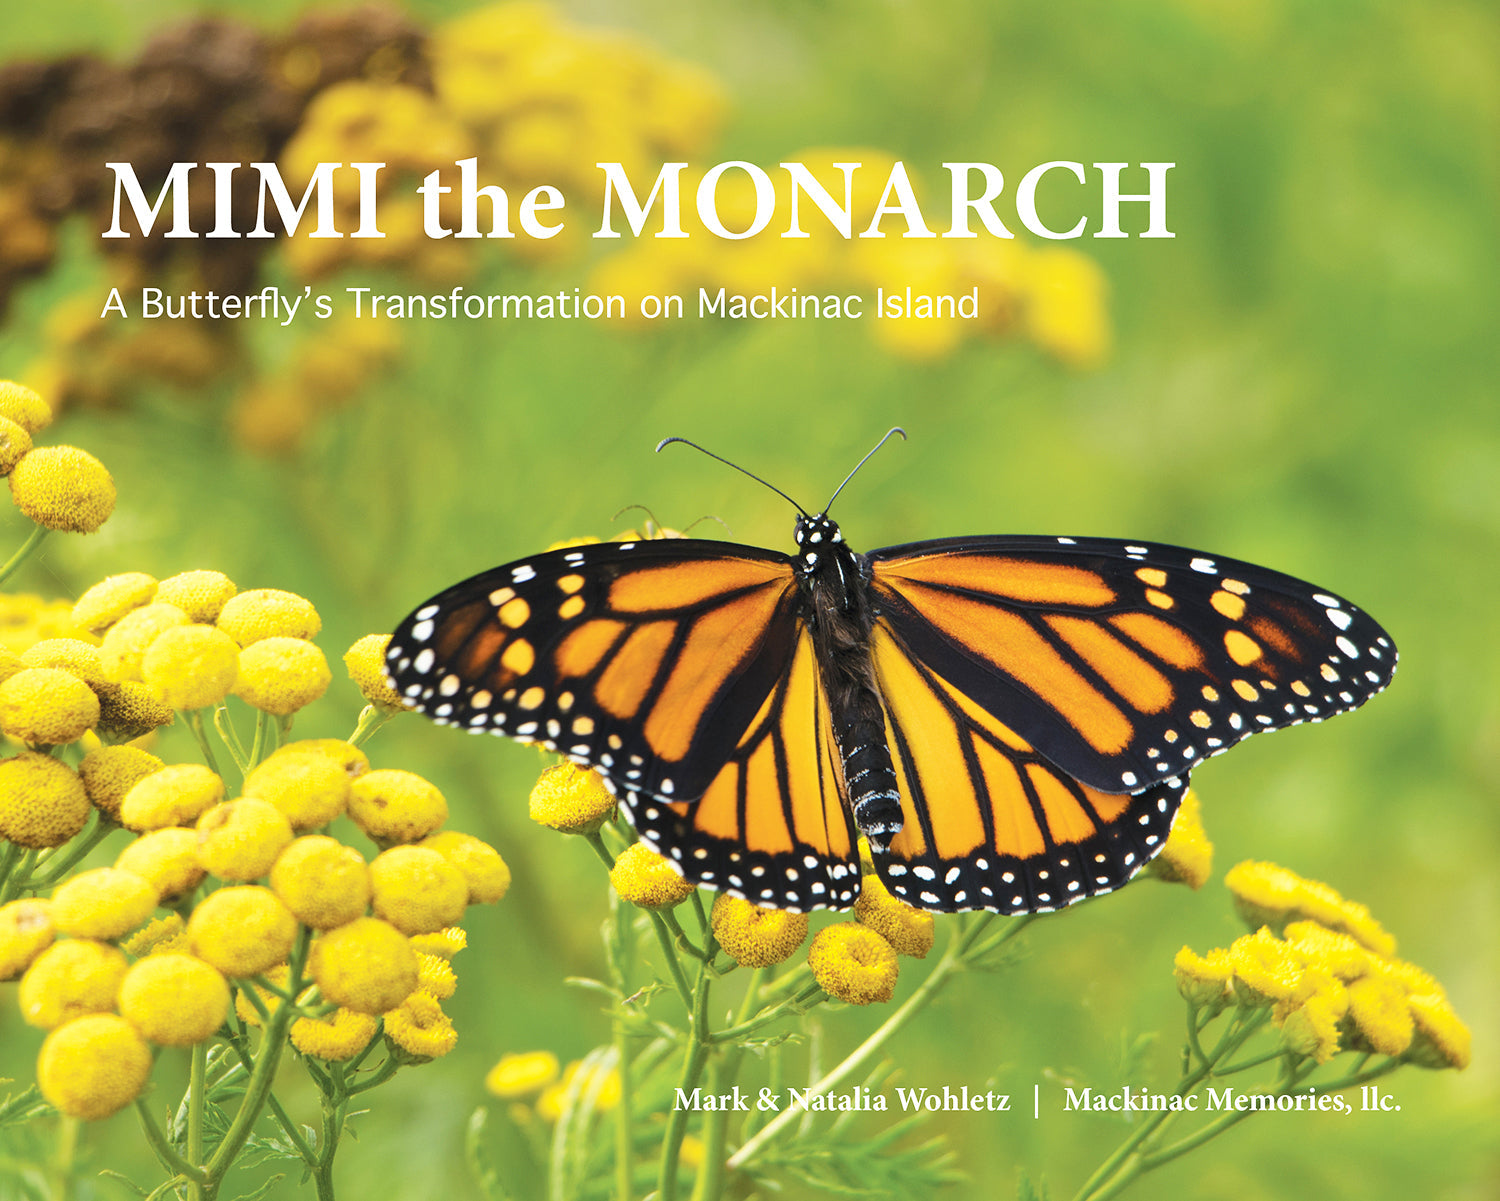 MIMI the Monarch, a children's science picture book, about the metamorphosis of a monarch butterfly on Mackinac Island, Mich.  Text by Mark Wohletz. Field notes by Natalia Wohletz.